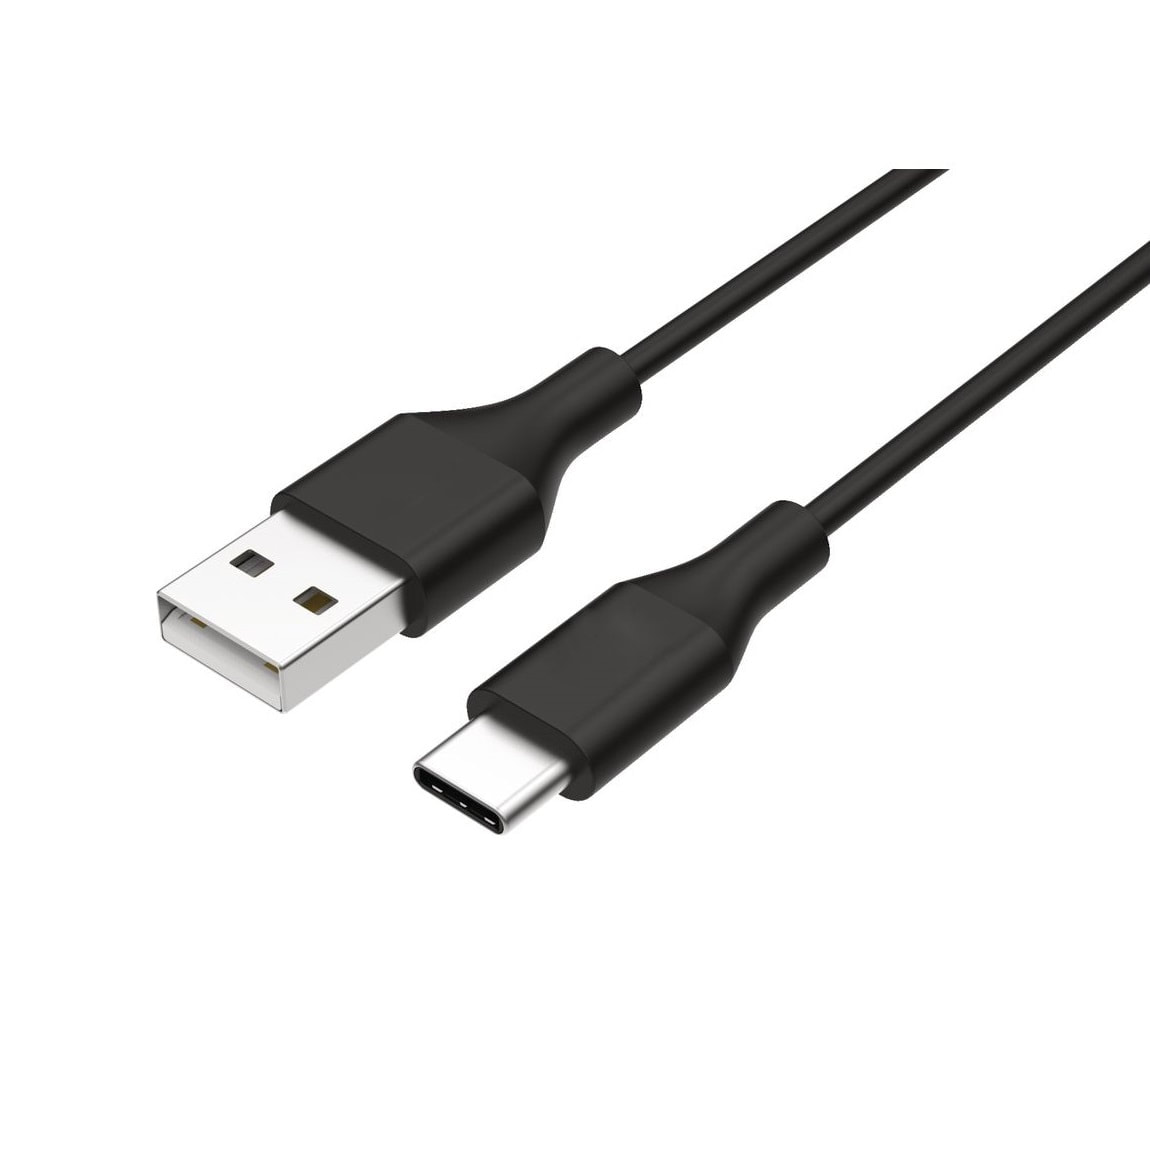 BoxWave Cable Compatible with Insta360 ONE X2 - DirectSync - USB 3.0 A to  USB 3.1 Type C, USB C Charge and Sync Cable for Insta360 ONE X2-6ft - Black